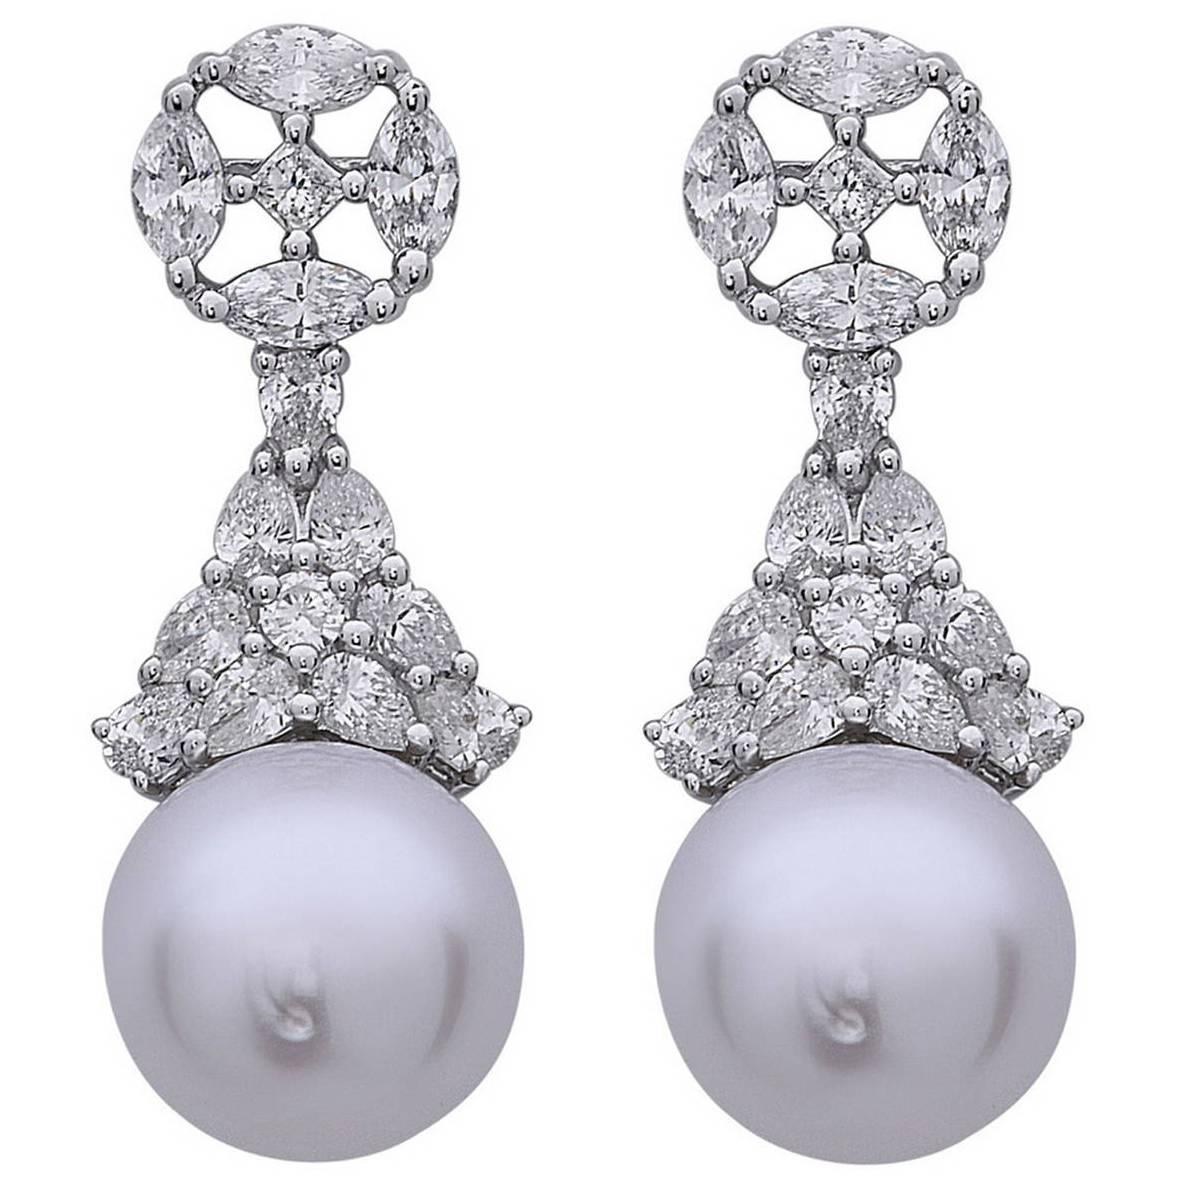 Alluring Diamond Earrings With South Sea Pearl Made In 18k White Gold